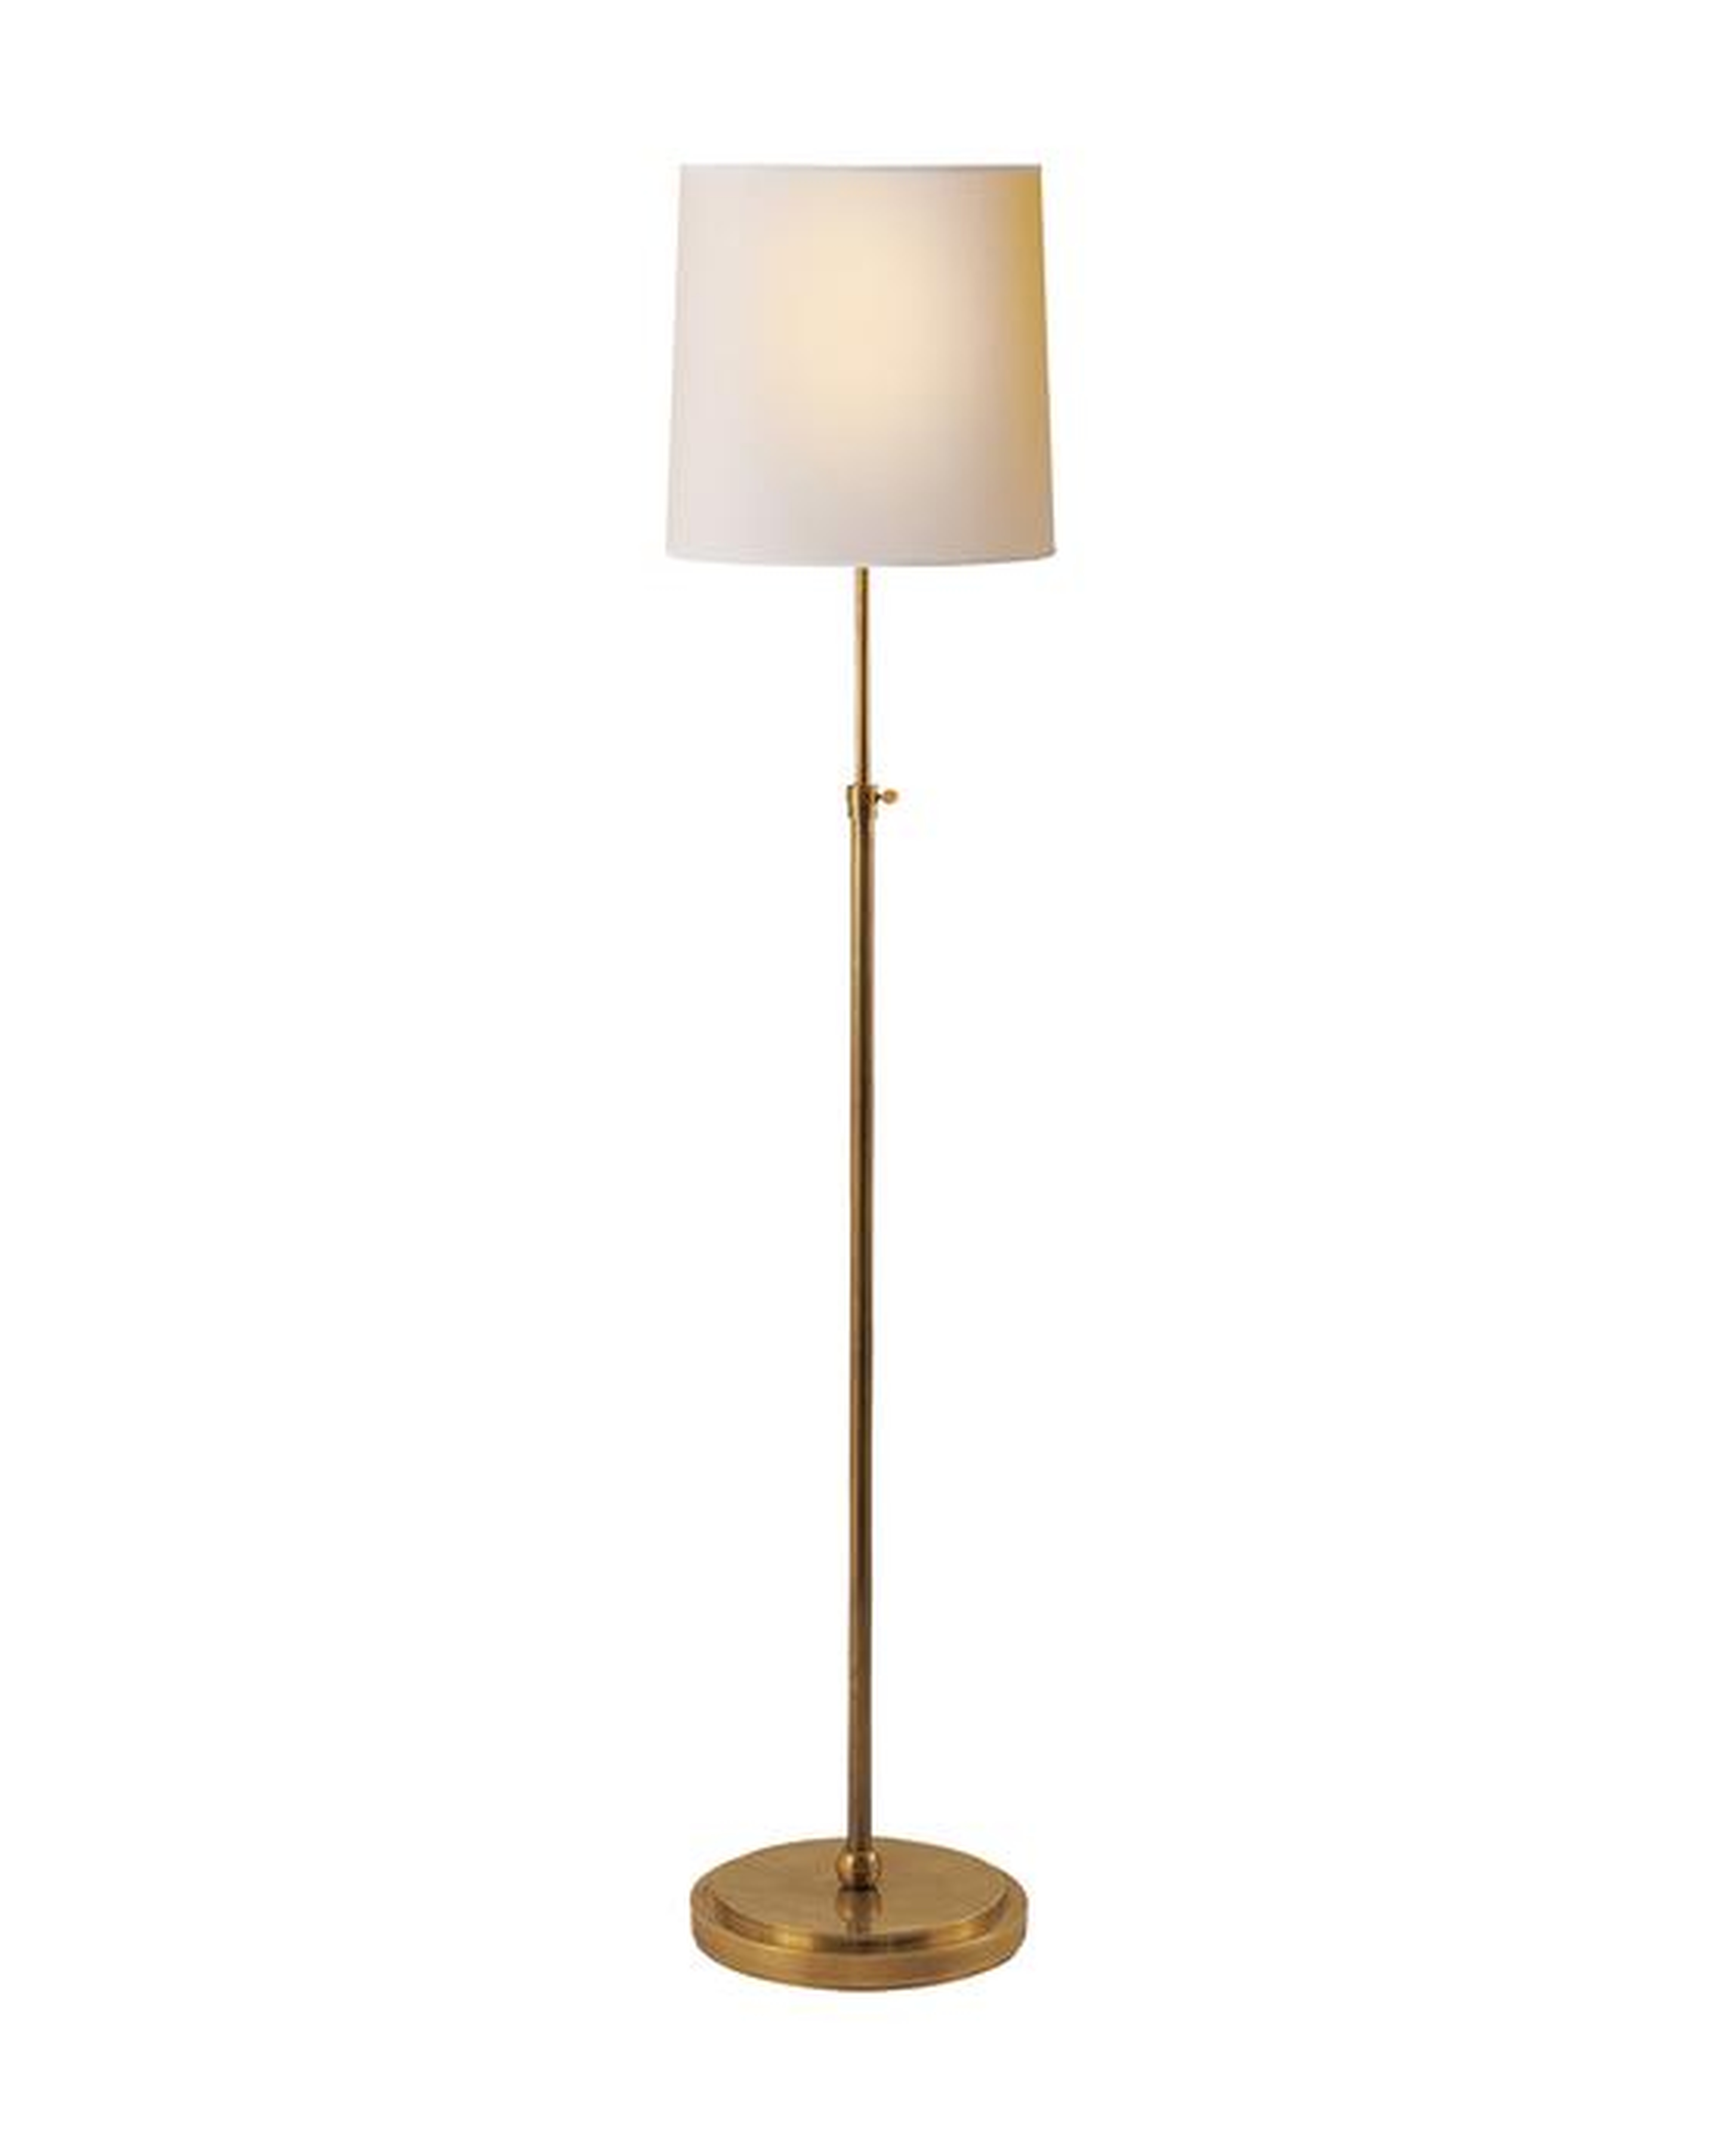 Bryant Floor Lamp, Hand-Rubbed Antique Brass - McGee & Co.